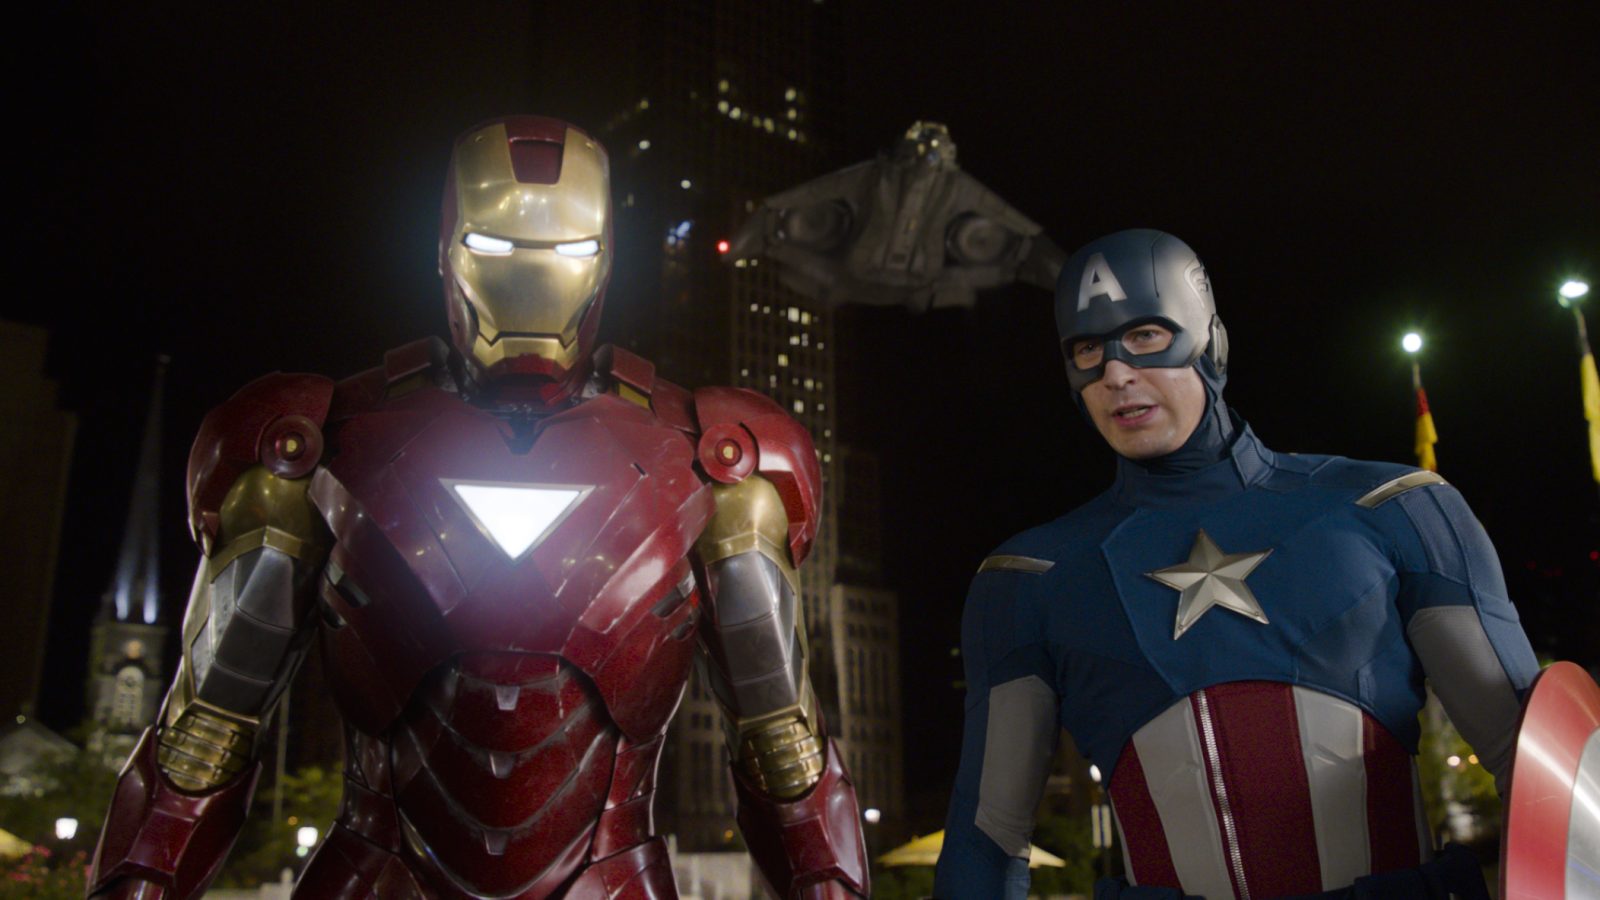 There Are 23 Movies Set in the Marvel Cinematic Universe — How Many Have You Seen? The Avengers (2012)